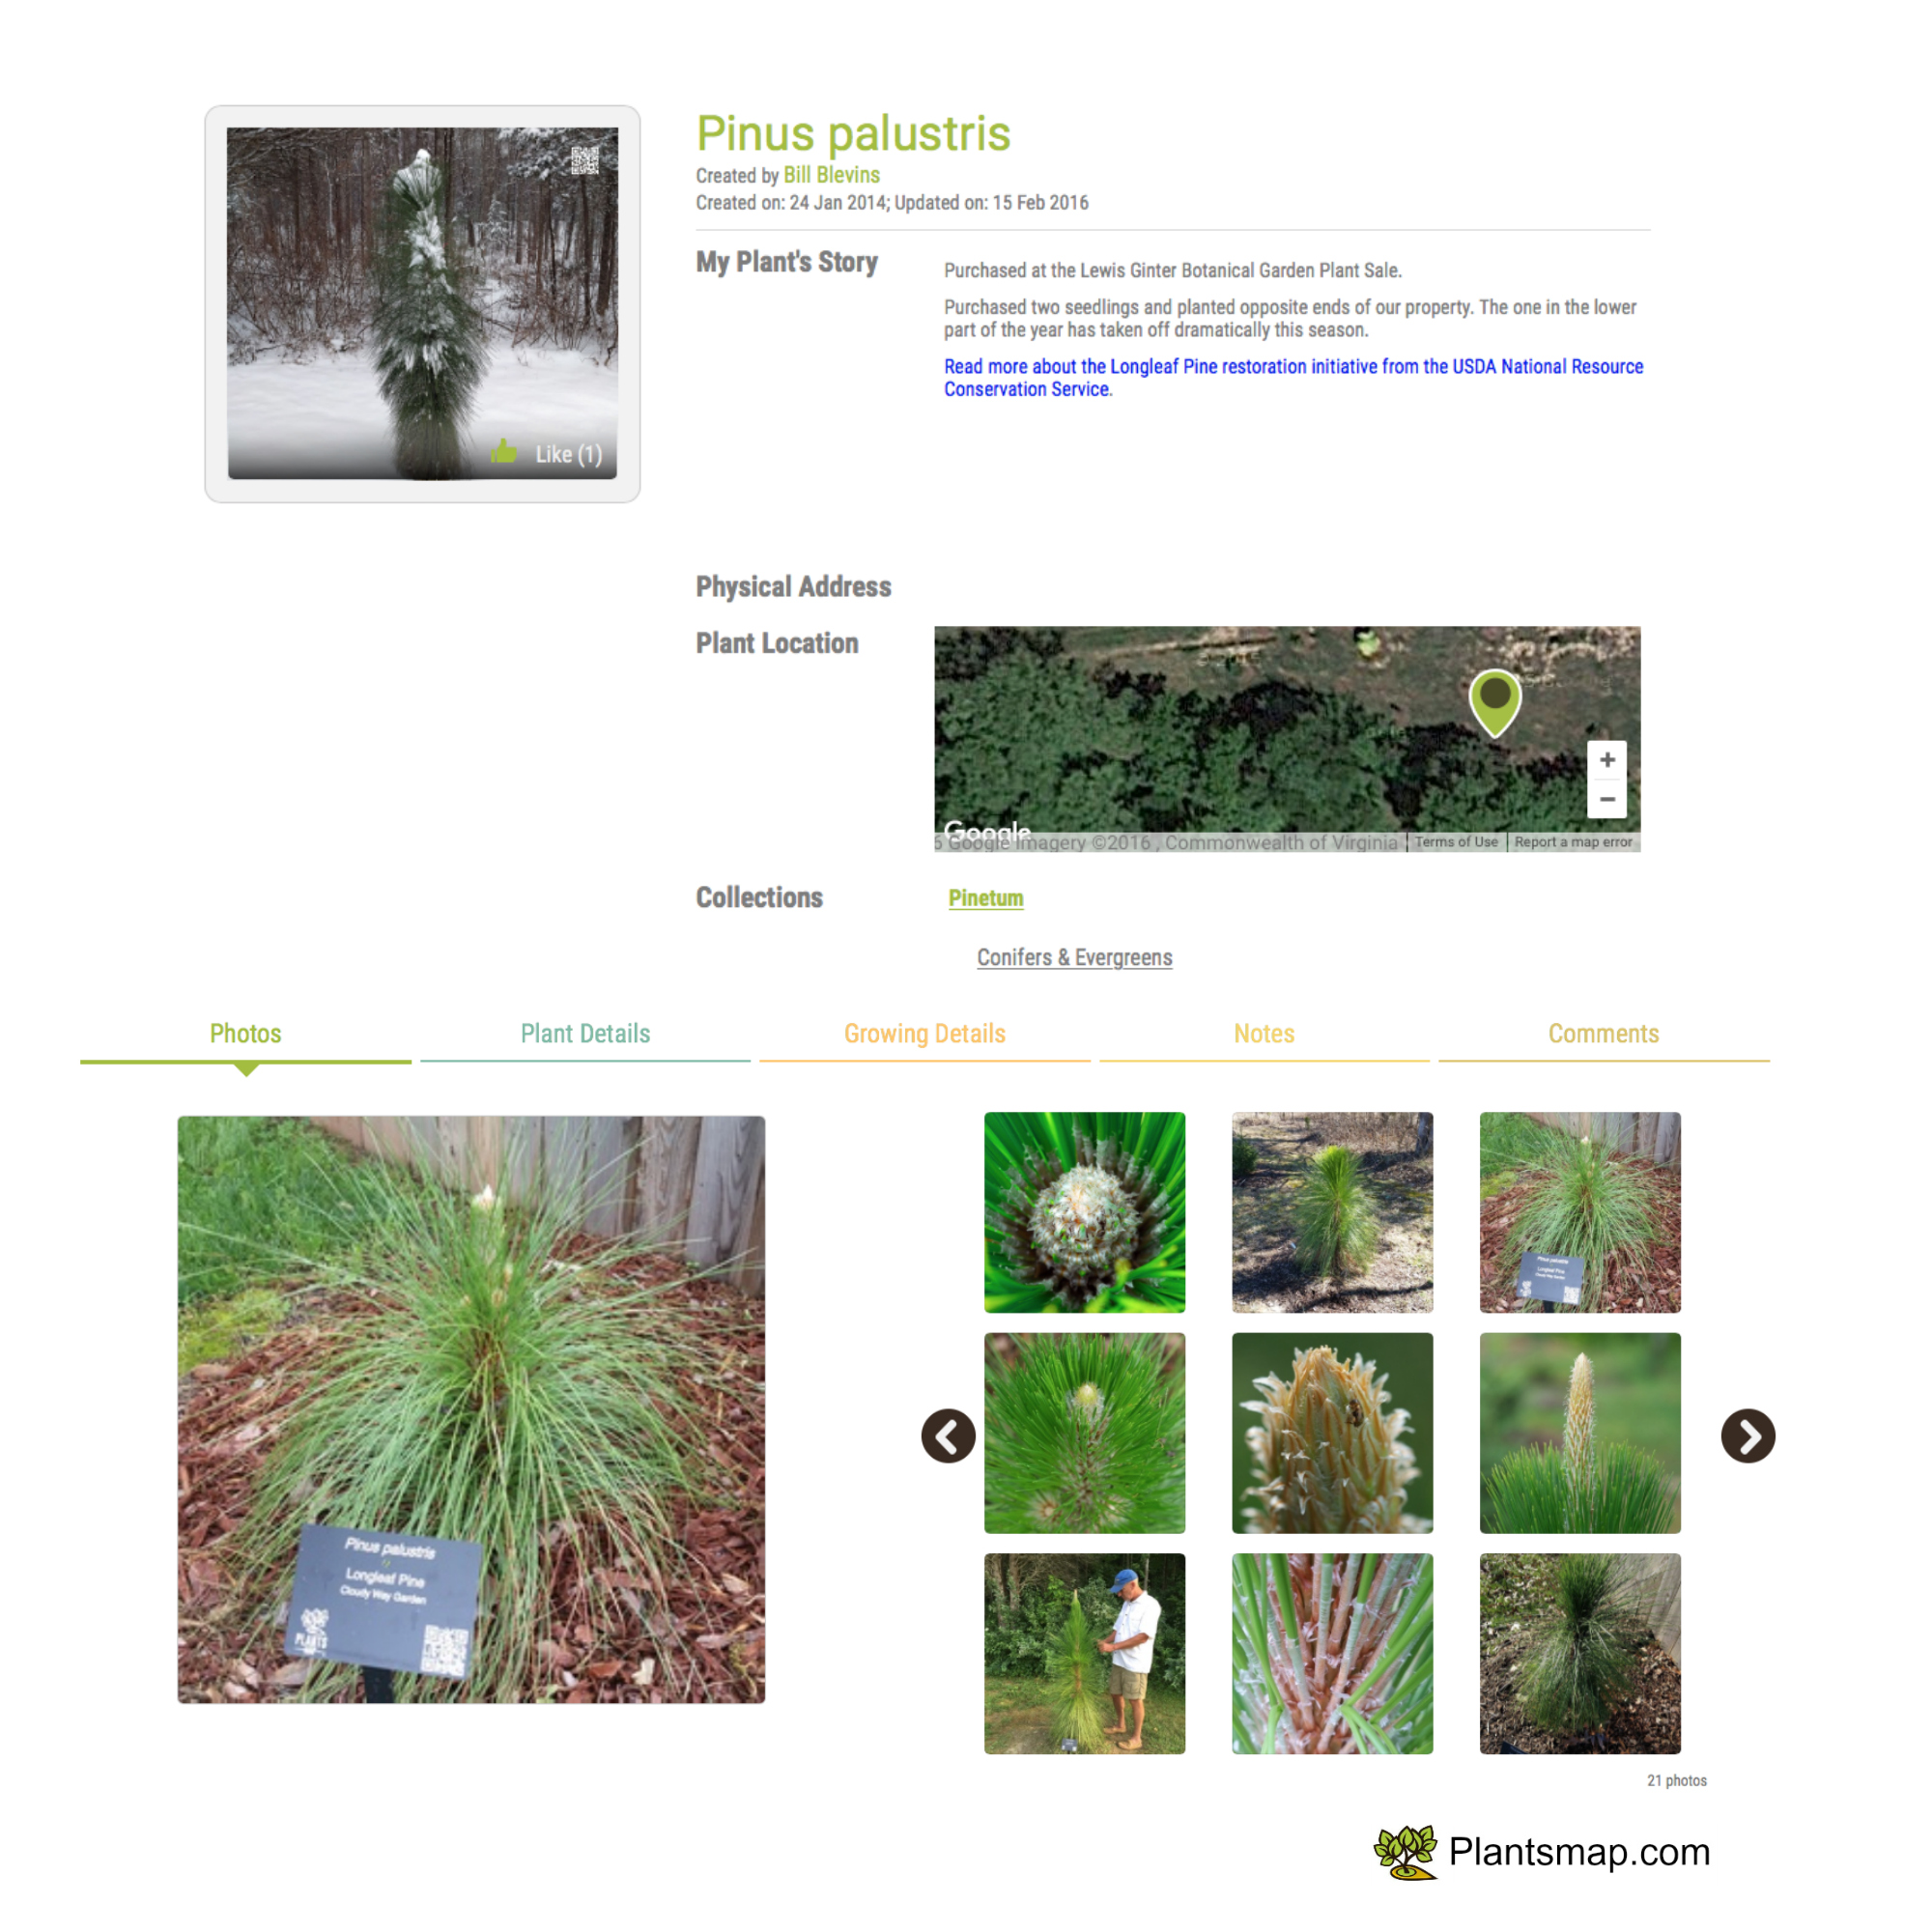 PlantsMap.com makes it easy to manage your plants and order garden labels.